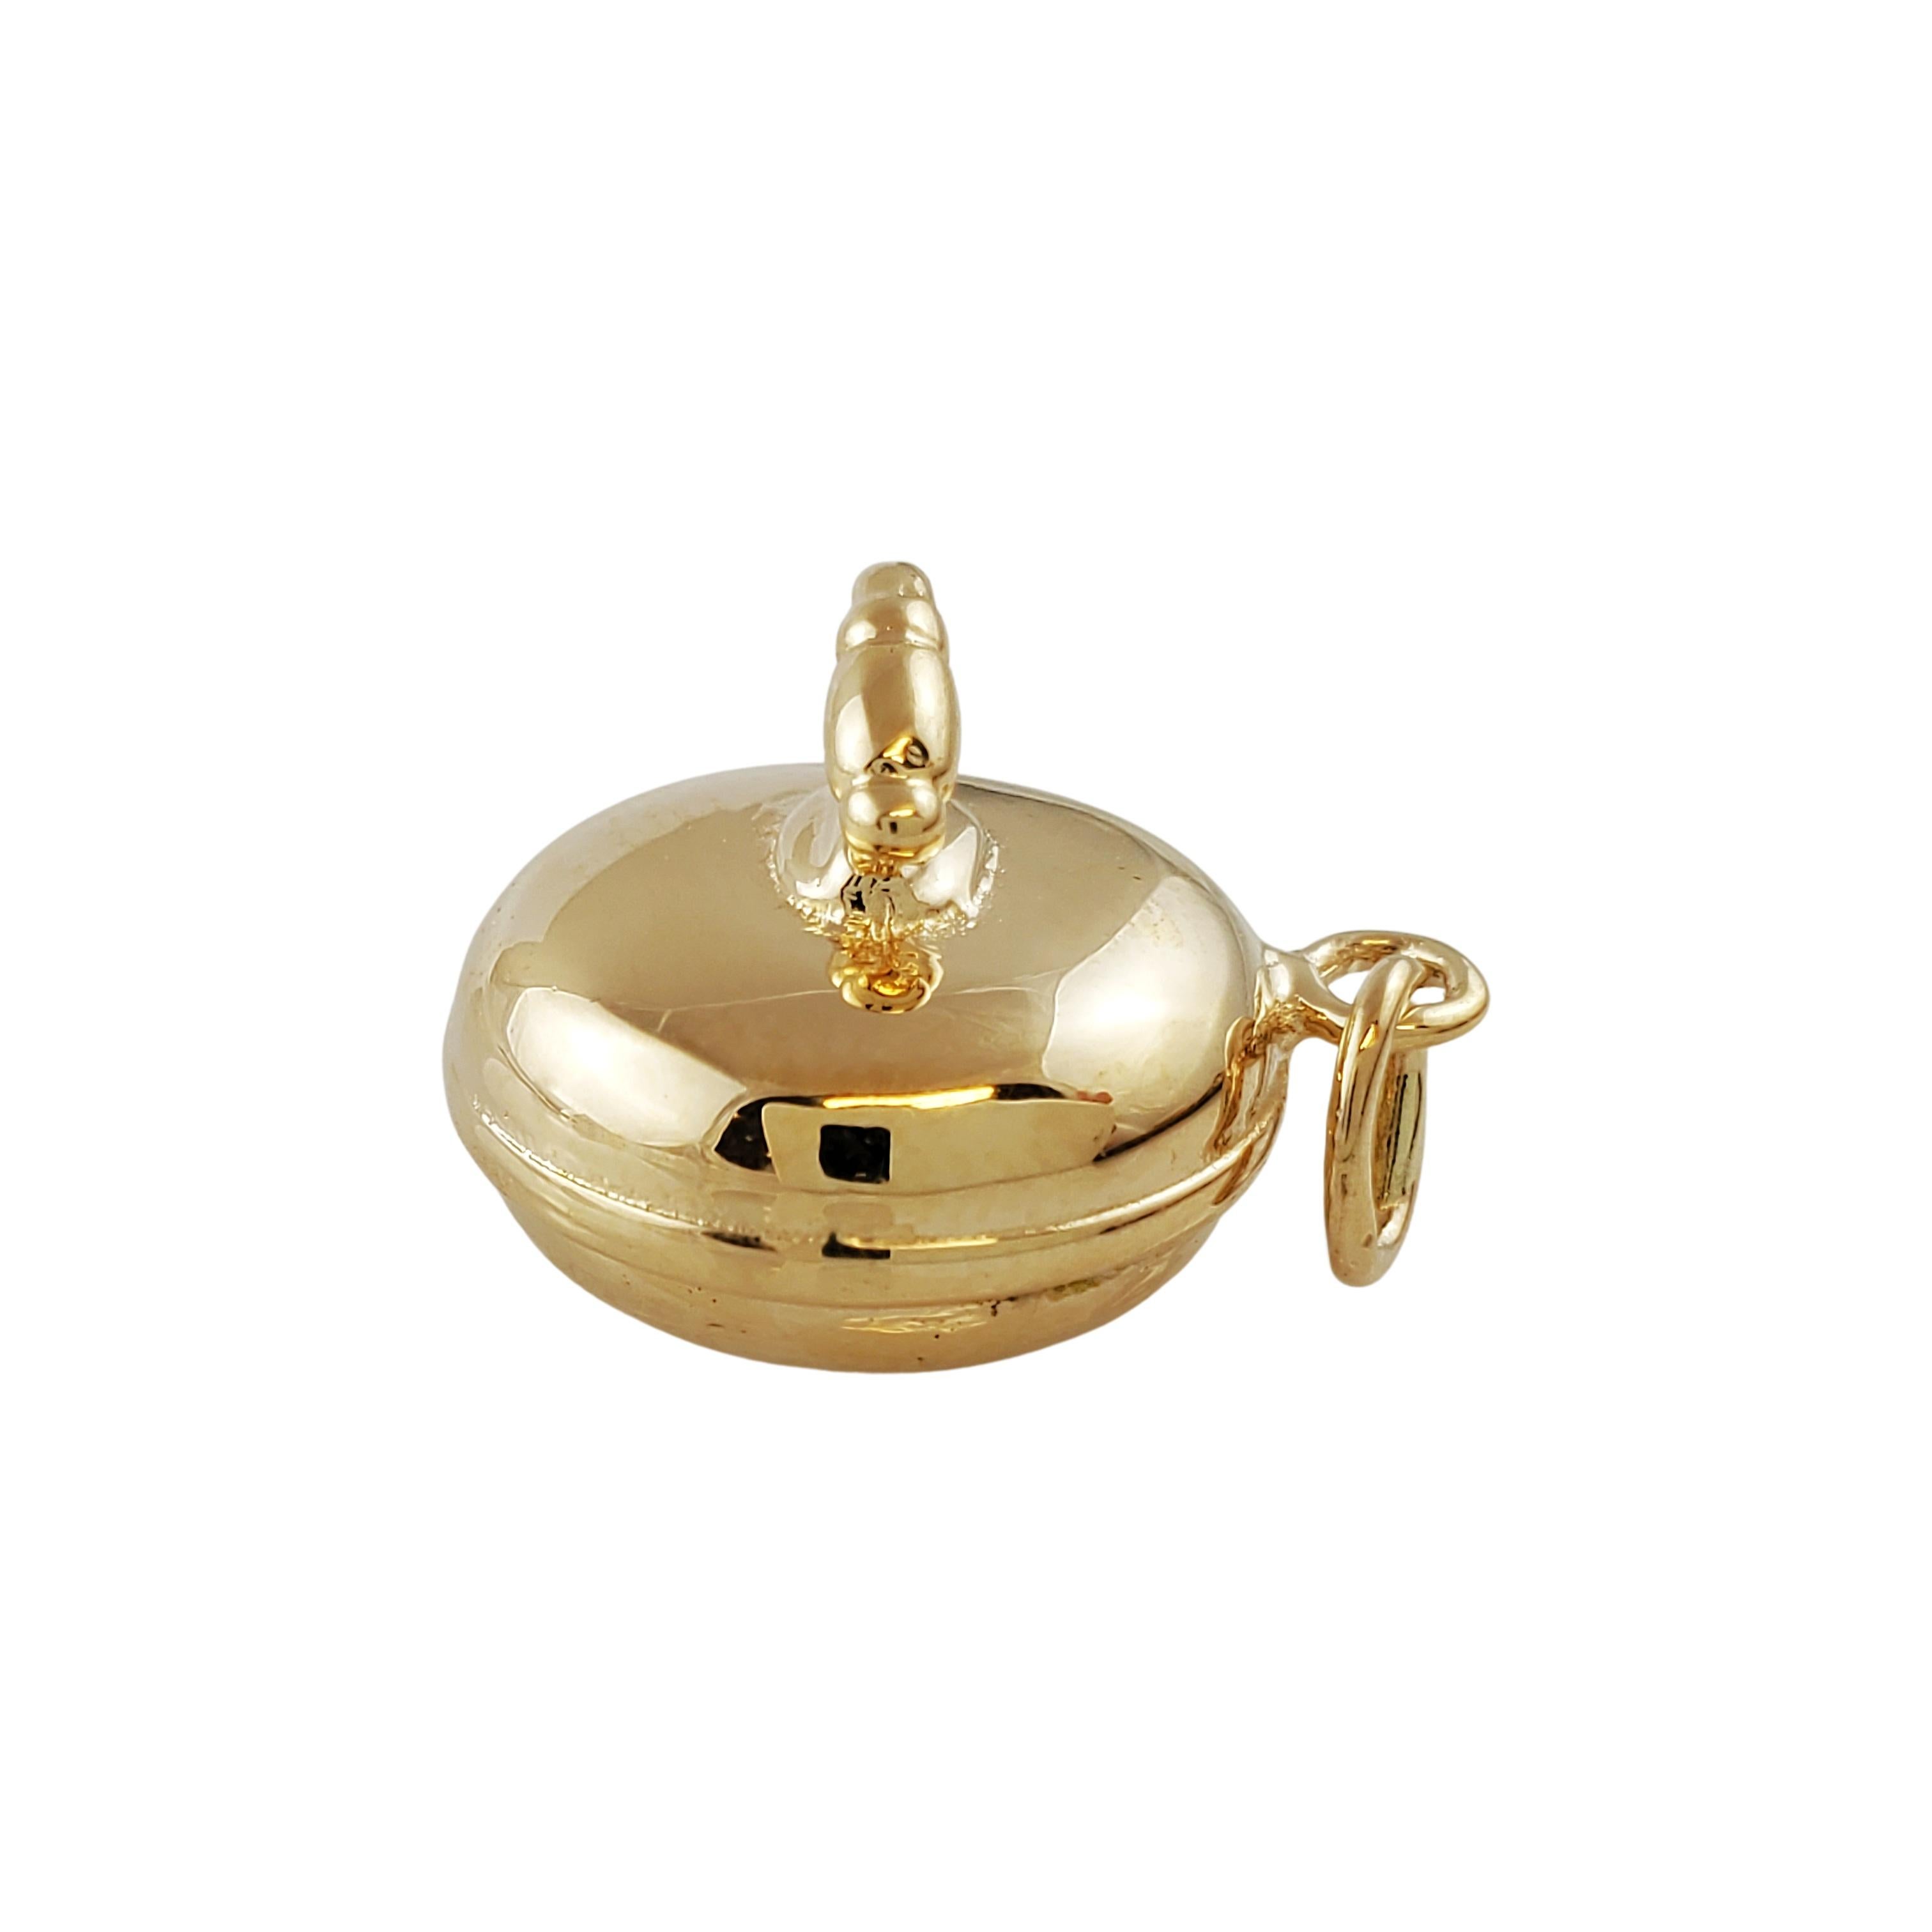 14K Yellow Gold Curling Weight Charm

Beautiful 3D 14k yellow gold curling weight charm such as a dumbbell style weight.

Size: 16mm X 10mm

Weight: 4.1 gr / 2.6 dwt

Tested: 14K

Very good condition, professionally polished.

Will come packaged in